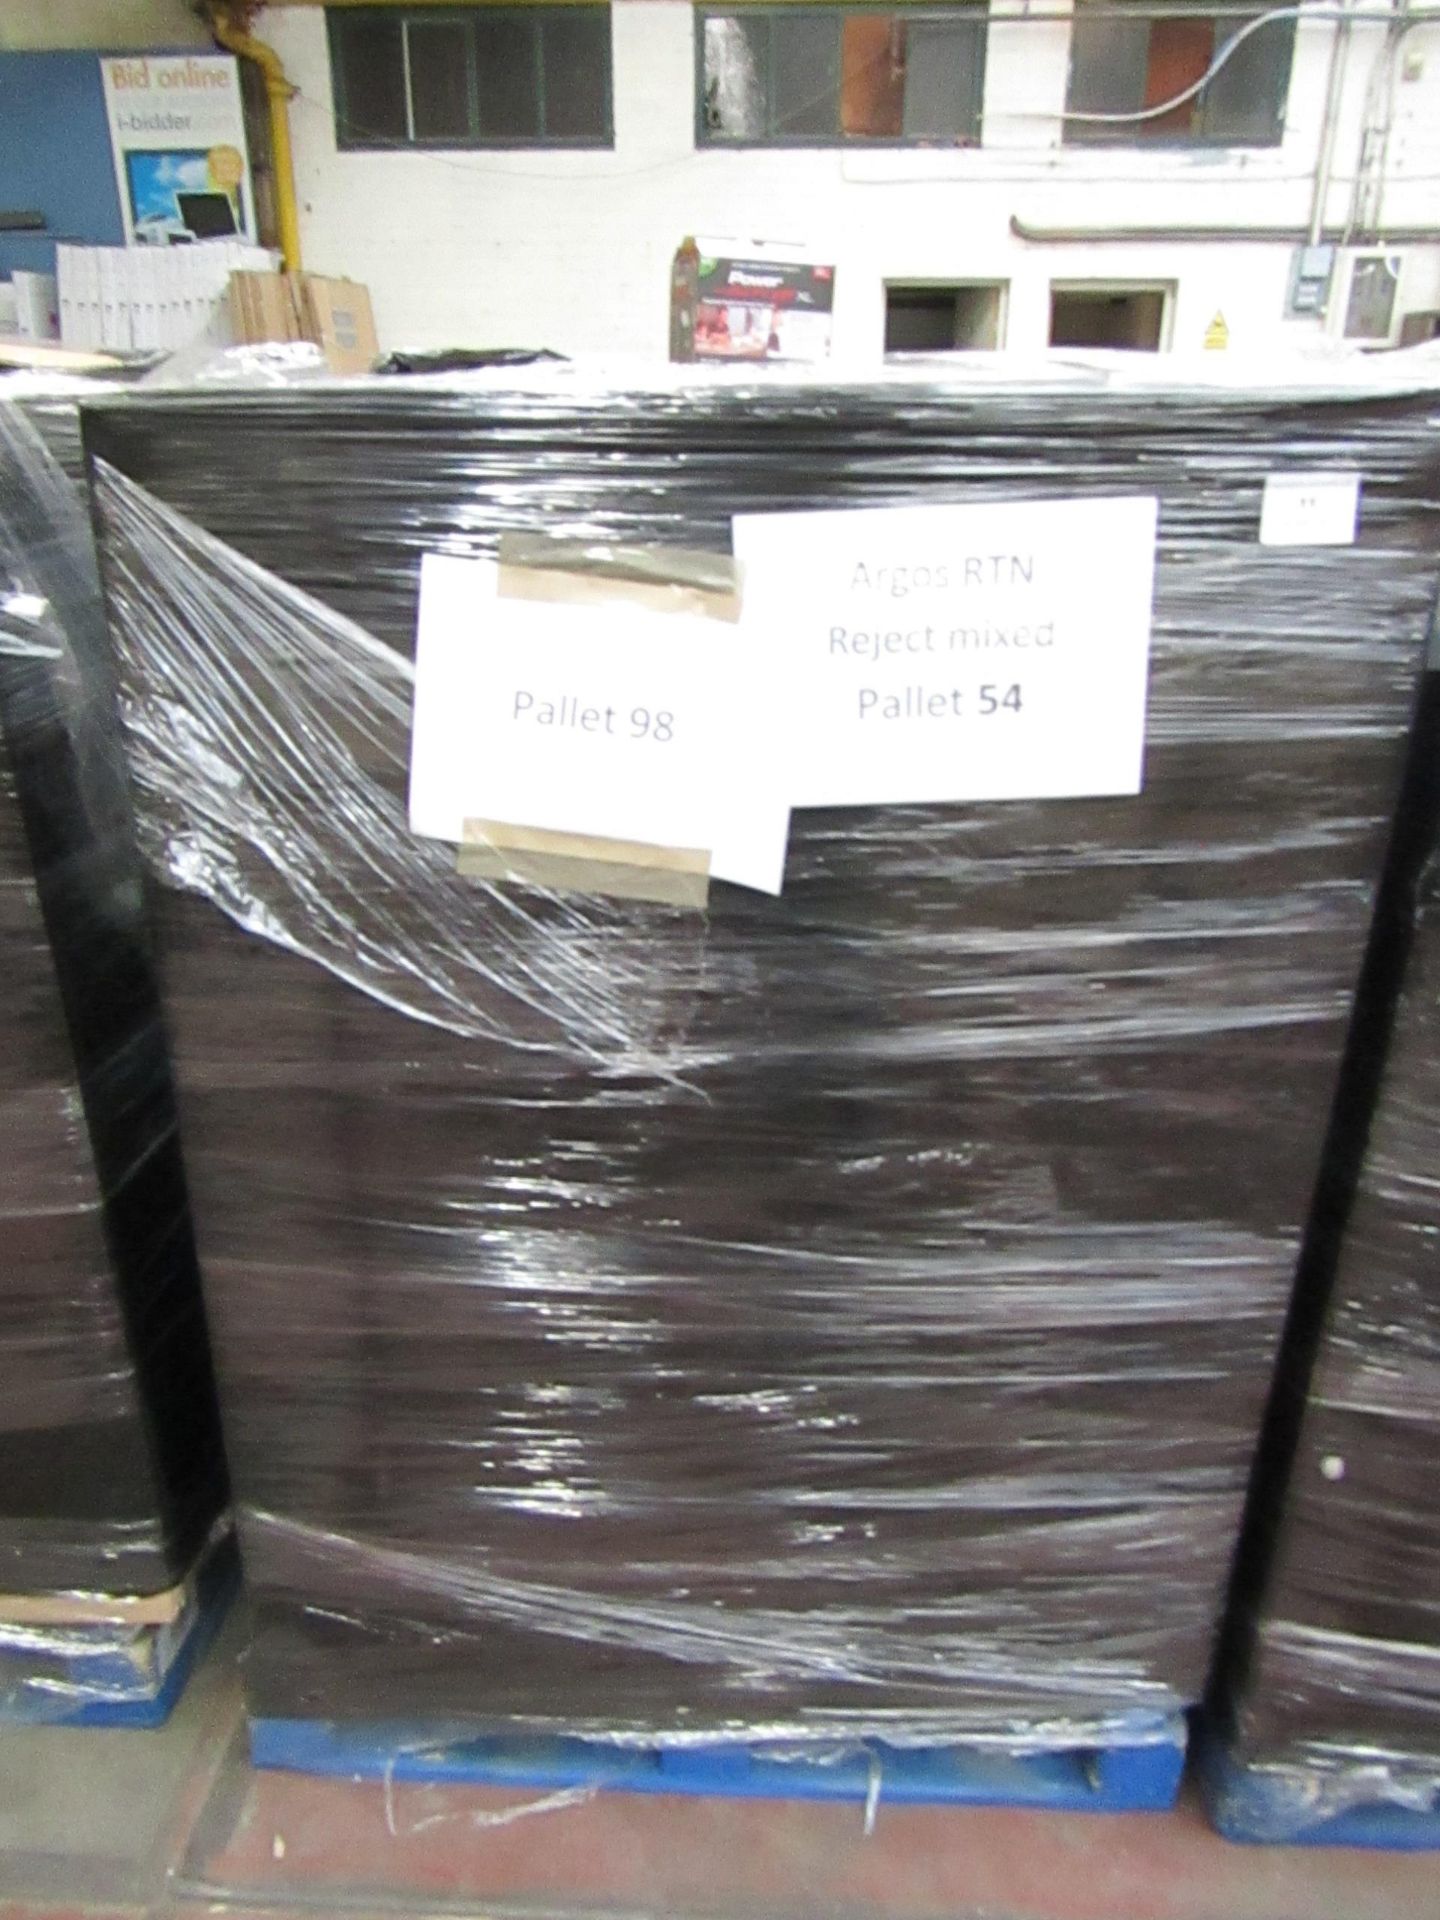 | APPROX 35X | THE PALLET CONTAINS NUTRI BULLETS, rDI KETTLES, AIR FRYER XL'S, RED COPPER CHEFS